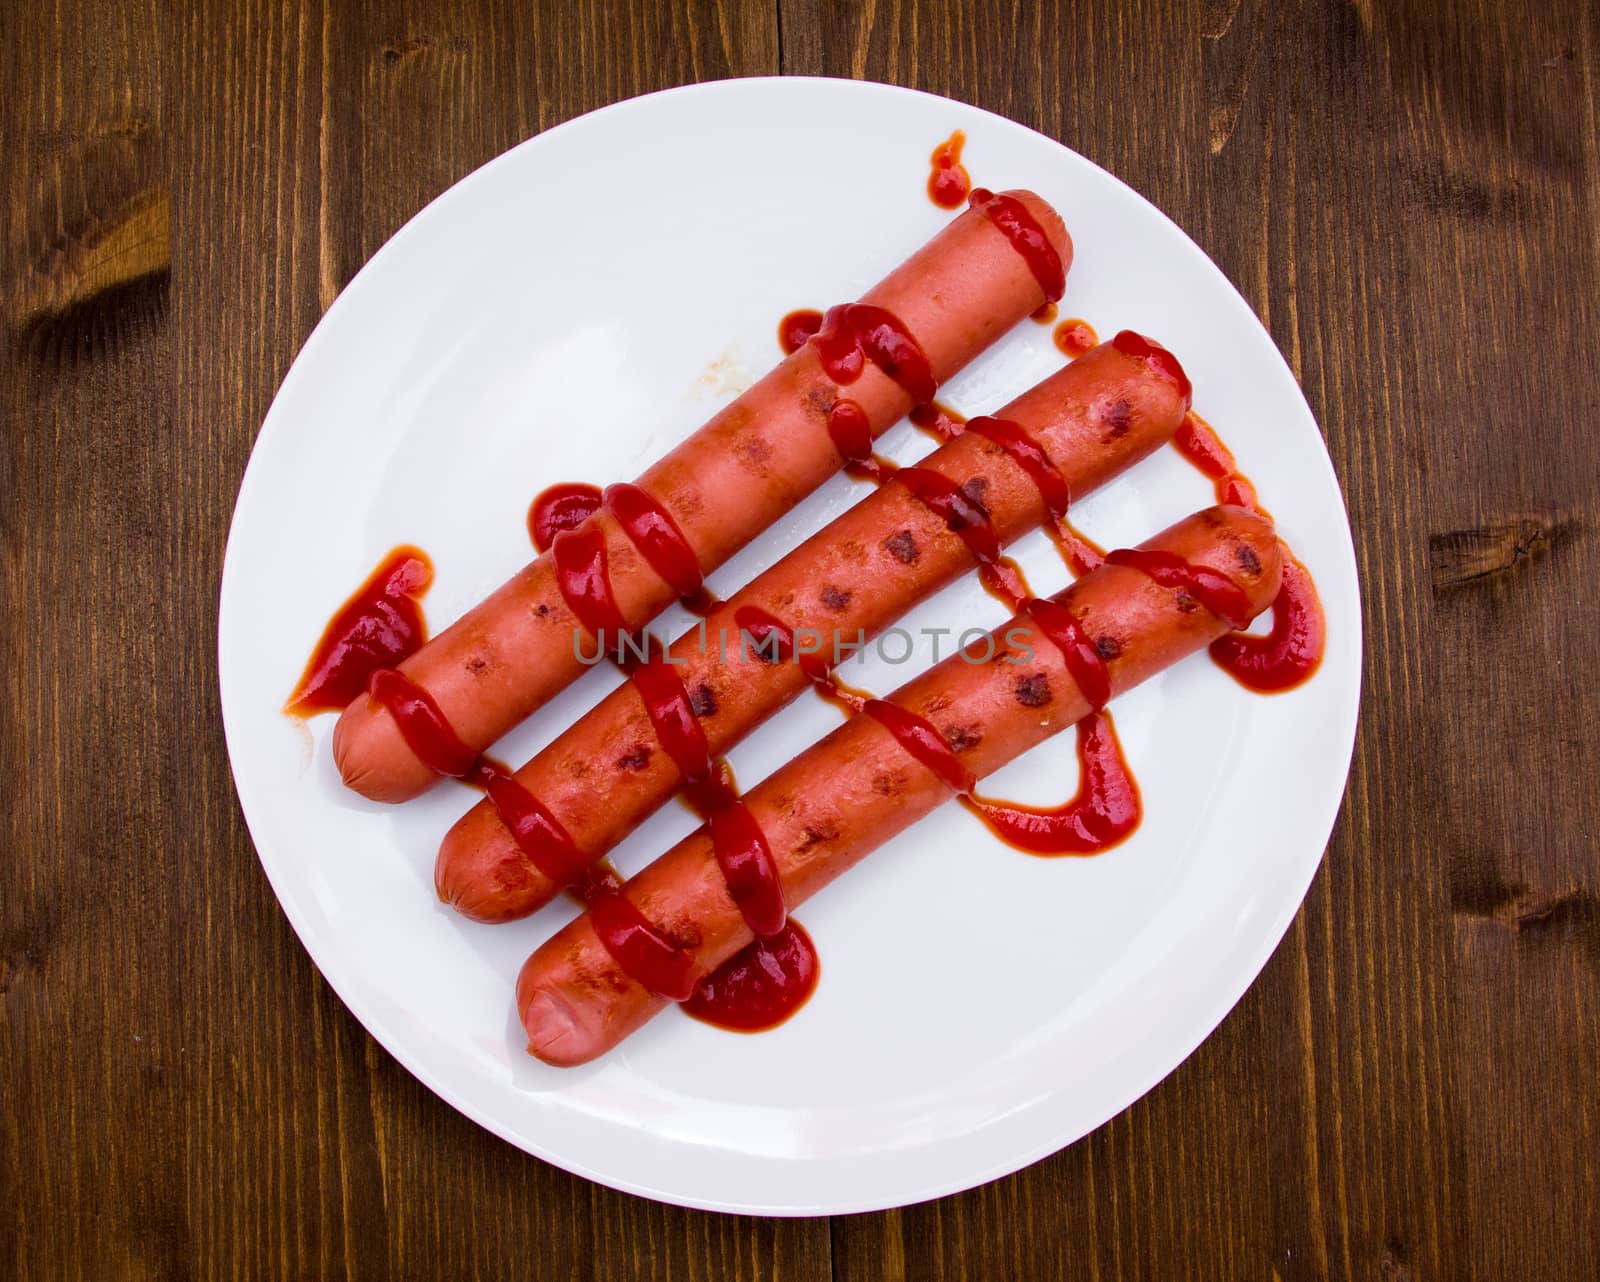 Sausages with tomato sauce from wooden by spafra